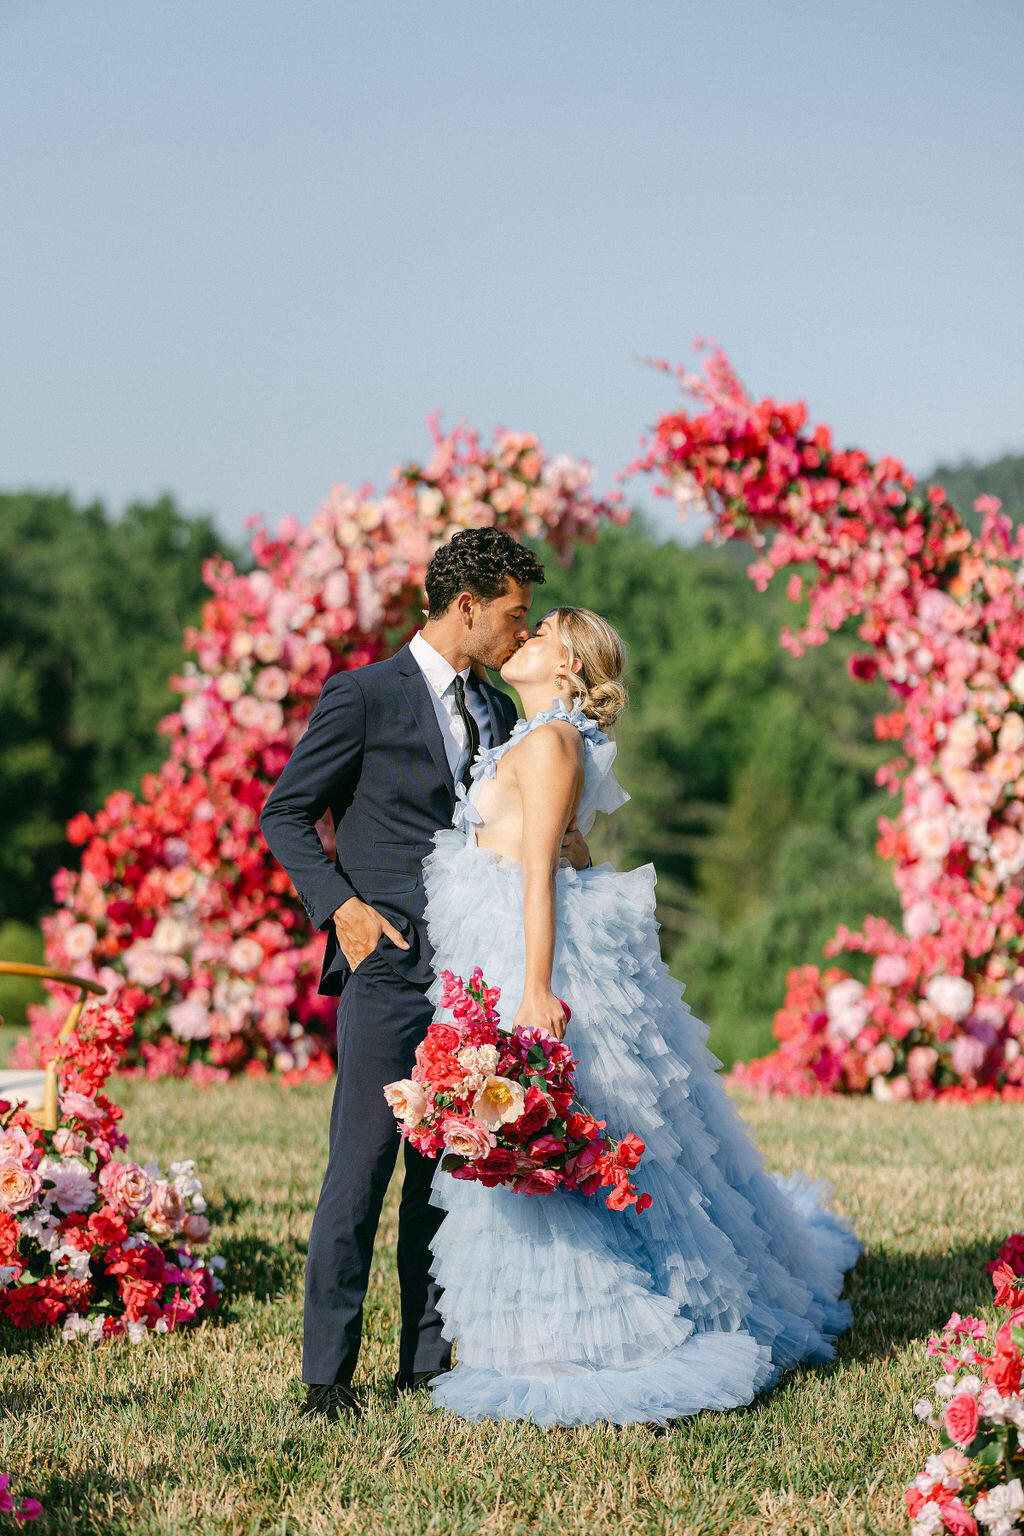 Editorial Weddings by Get Ready Photo at Glenstone Gardens 11